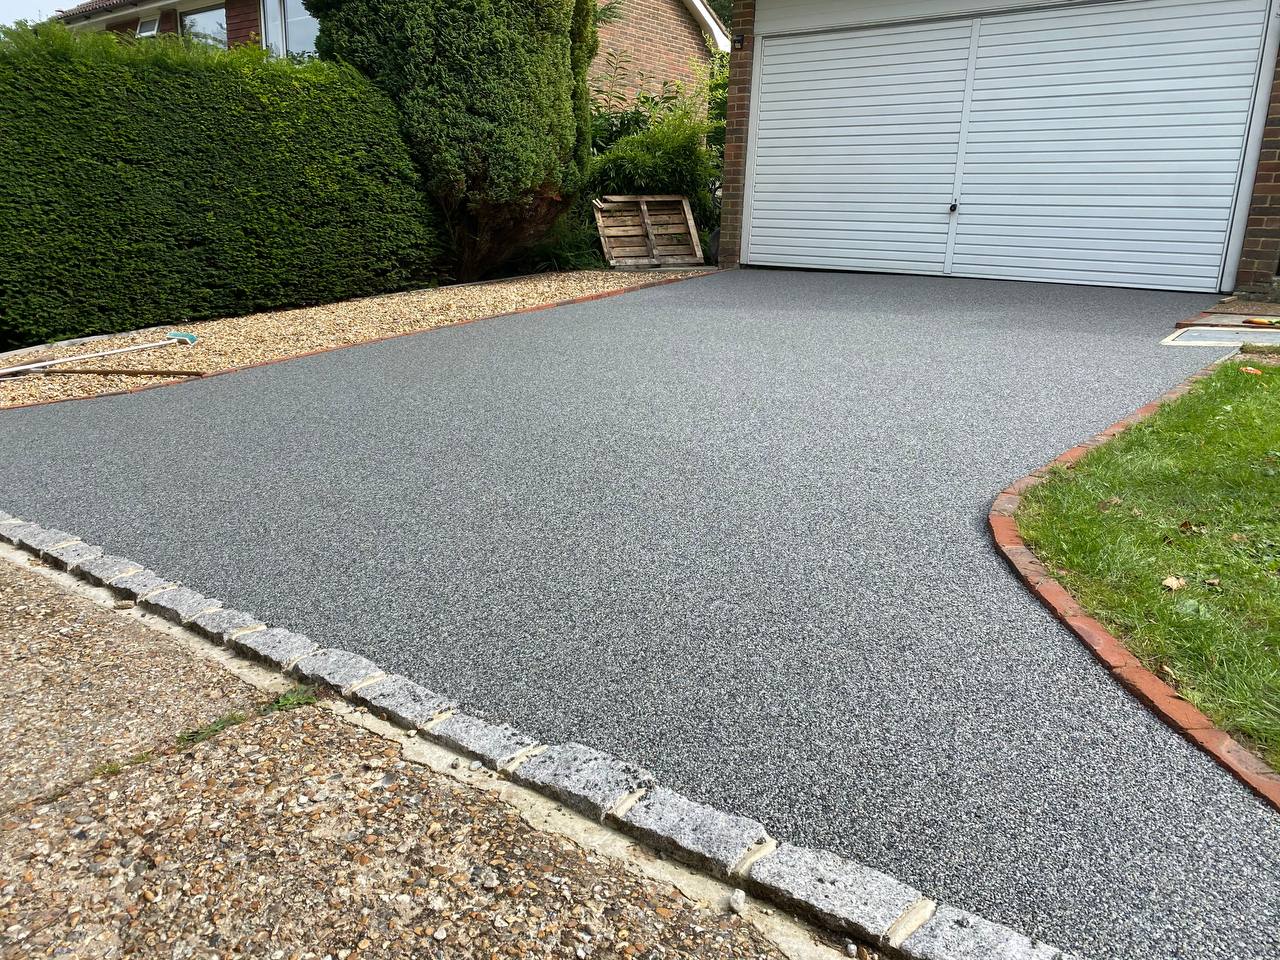 This is a photo of a new resin bound driveway carried out in Cheshire. All works done by Resin Driveways Cheshire